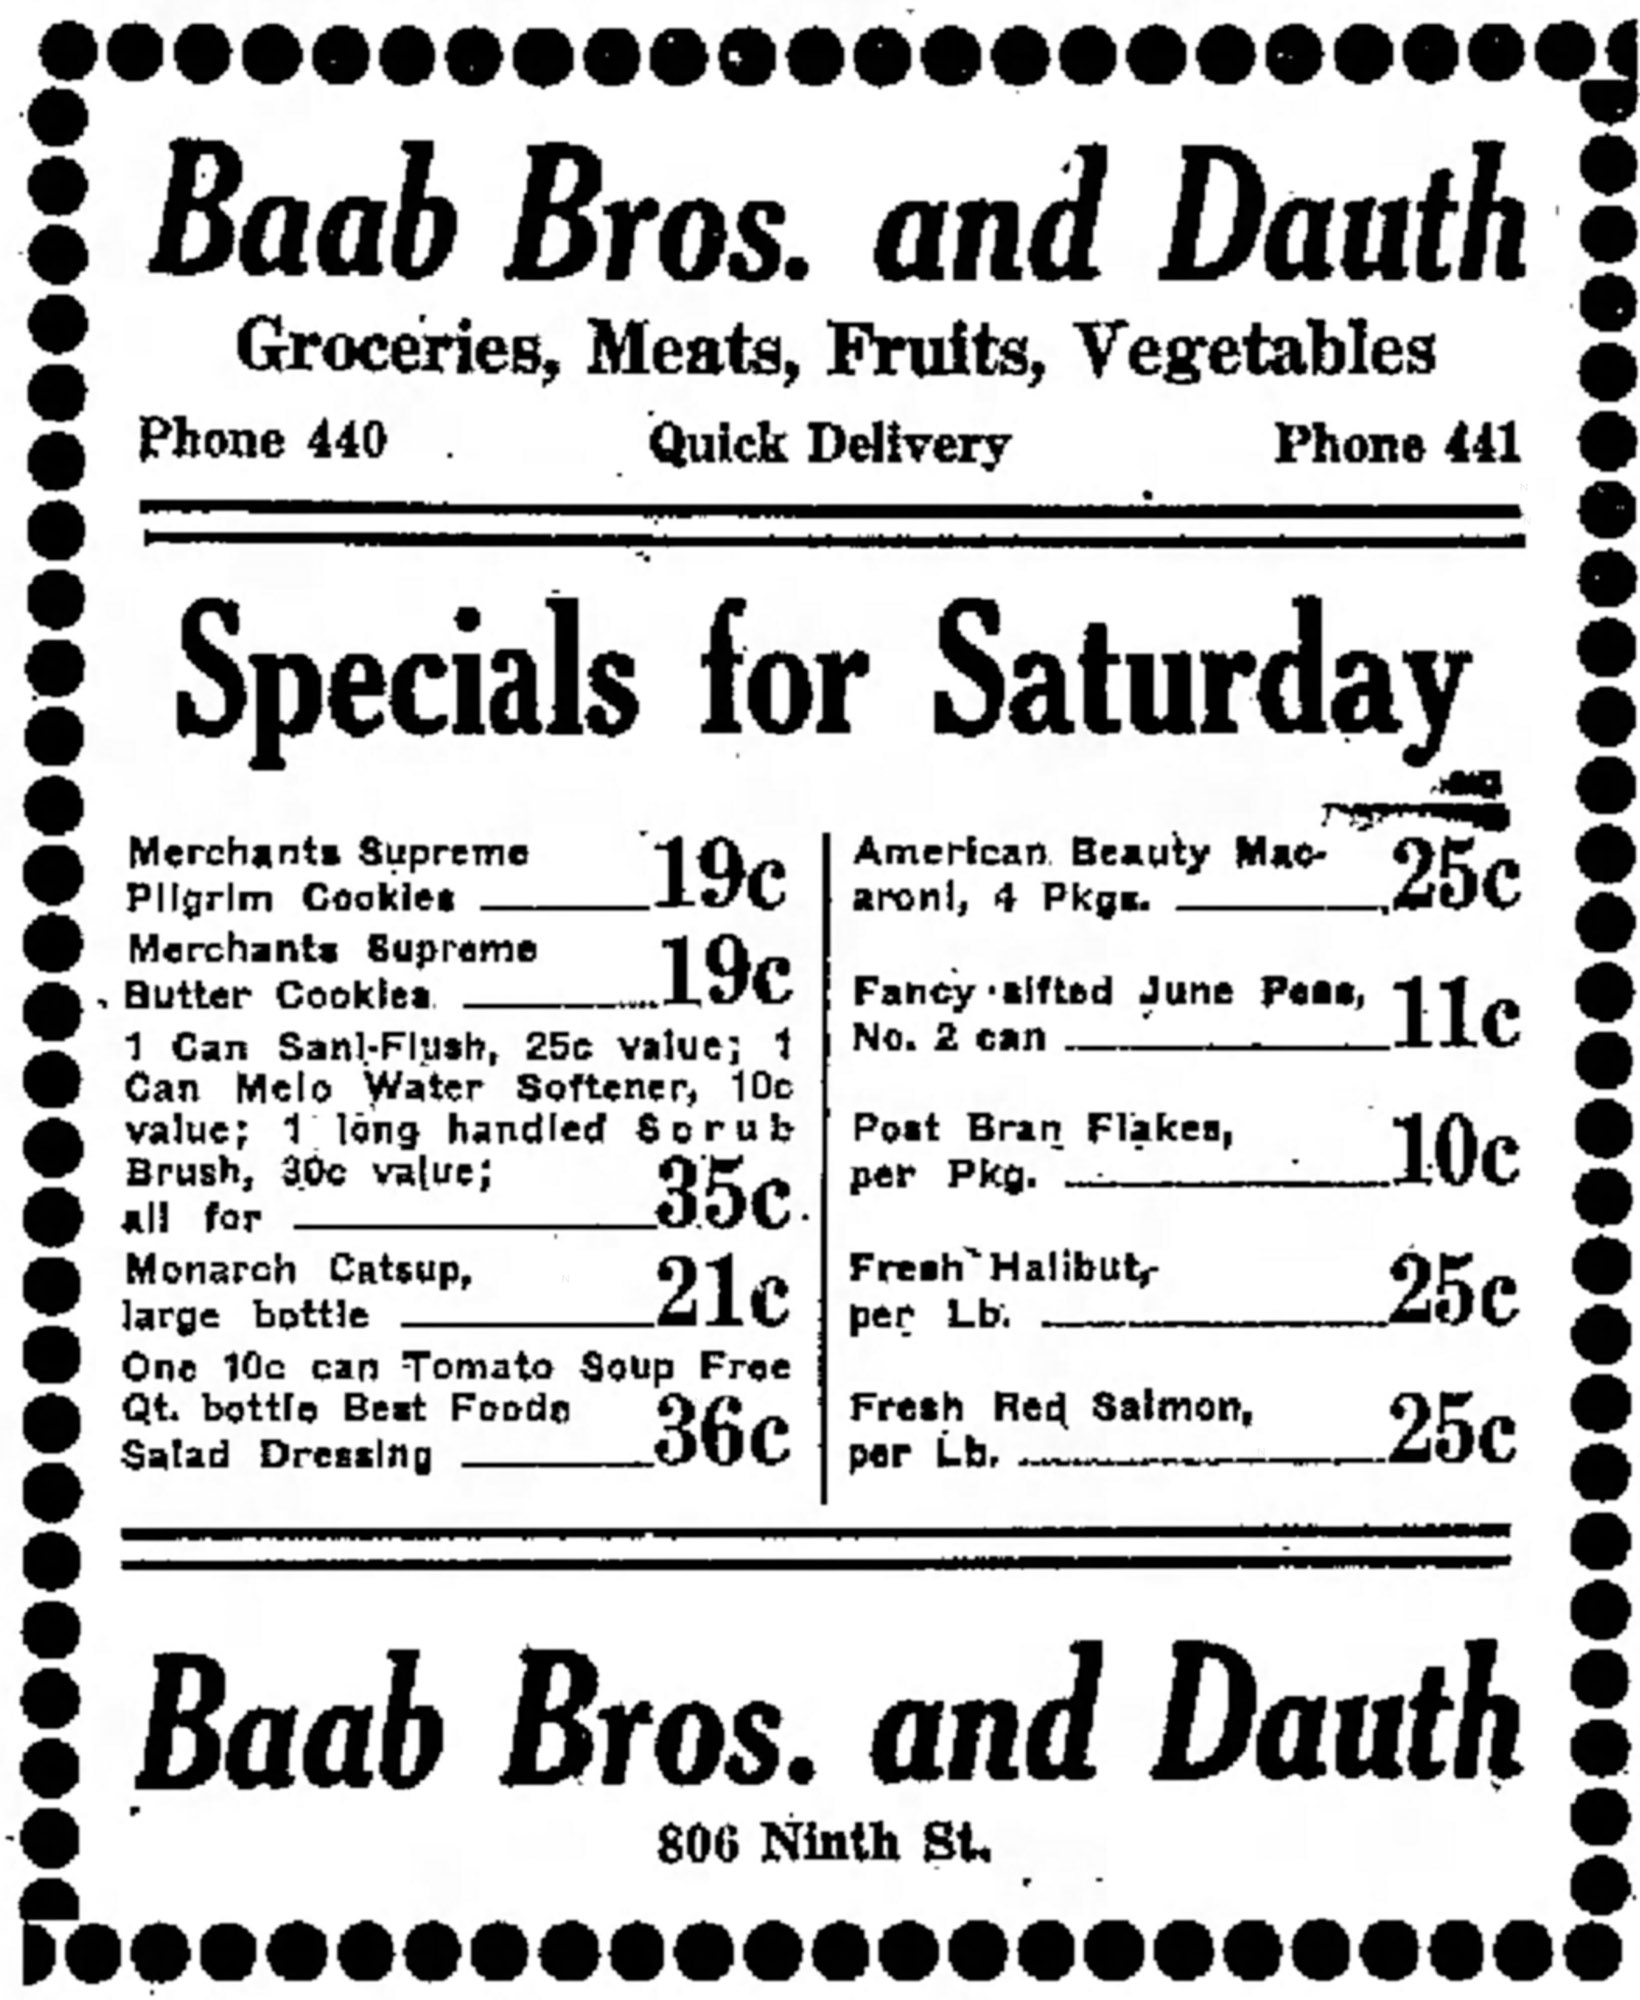 Dauth Family Archive - 1931-08-21 - Greeley Daily Tribune - Baab Bros and Dauth Advertisement